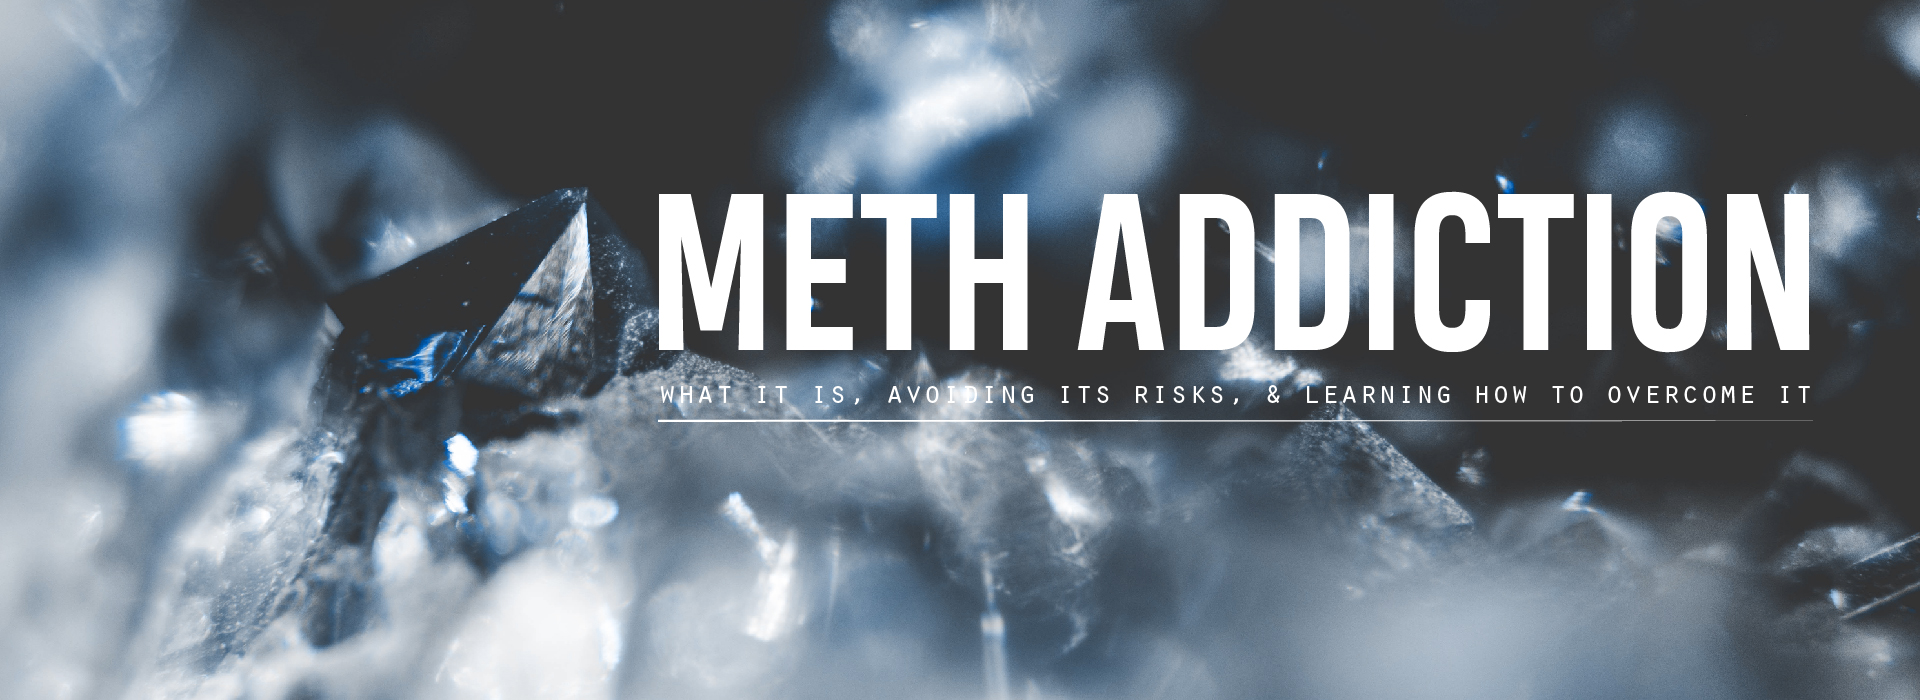 Meth addiction, what it is, avoiding its risk, and learning how to overcome it.